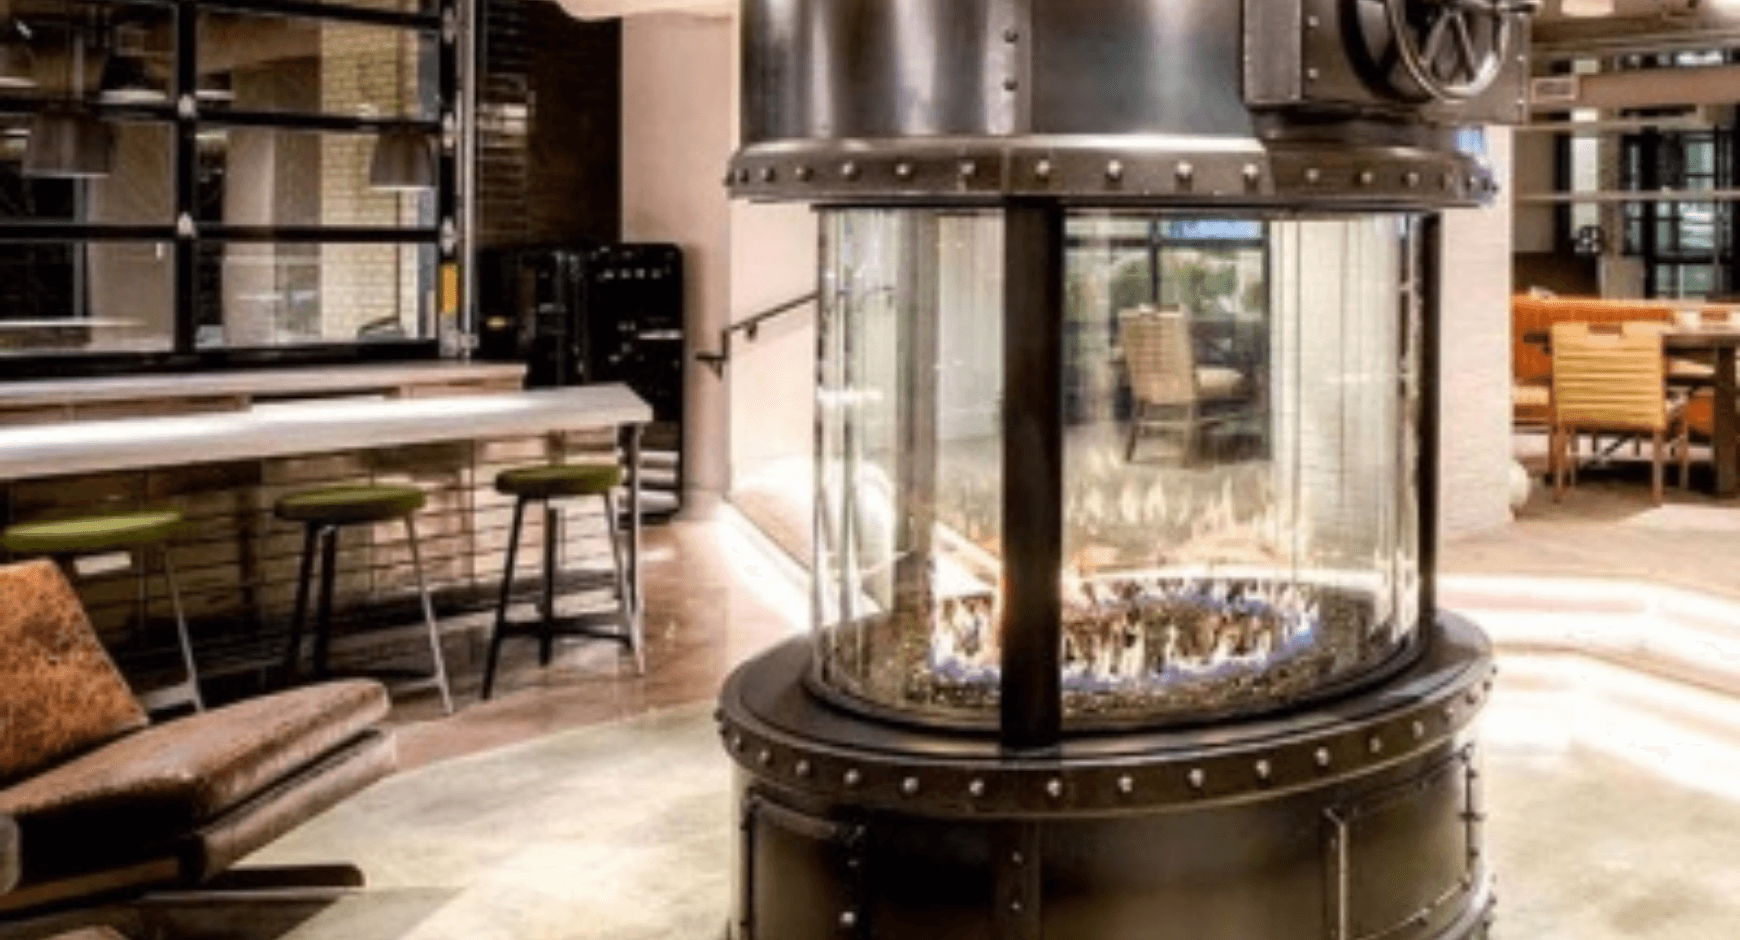 Hotel lobby design that includes a round fireplace